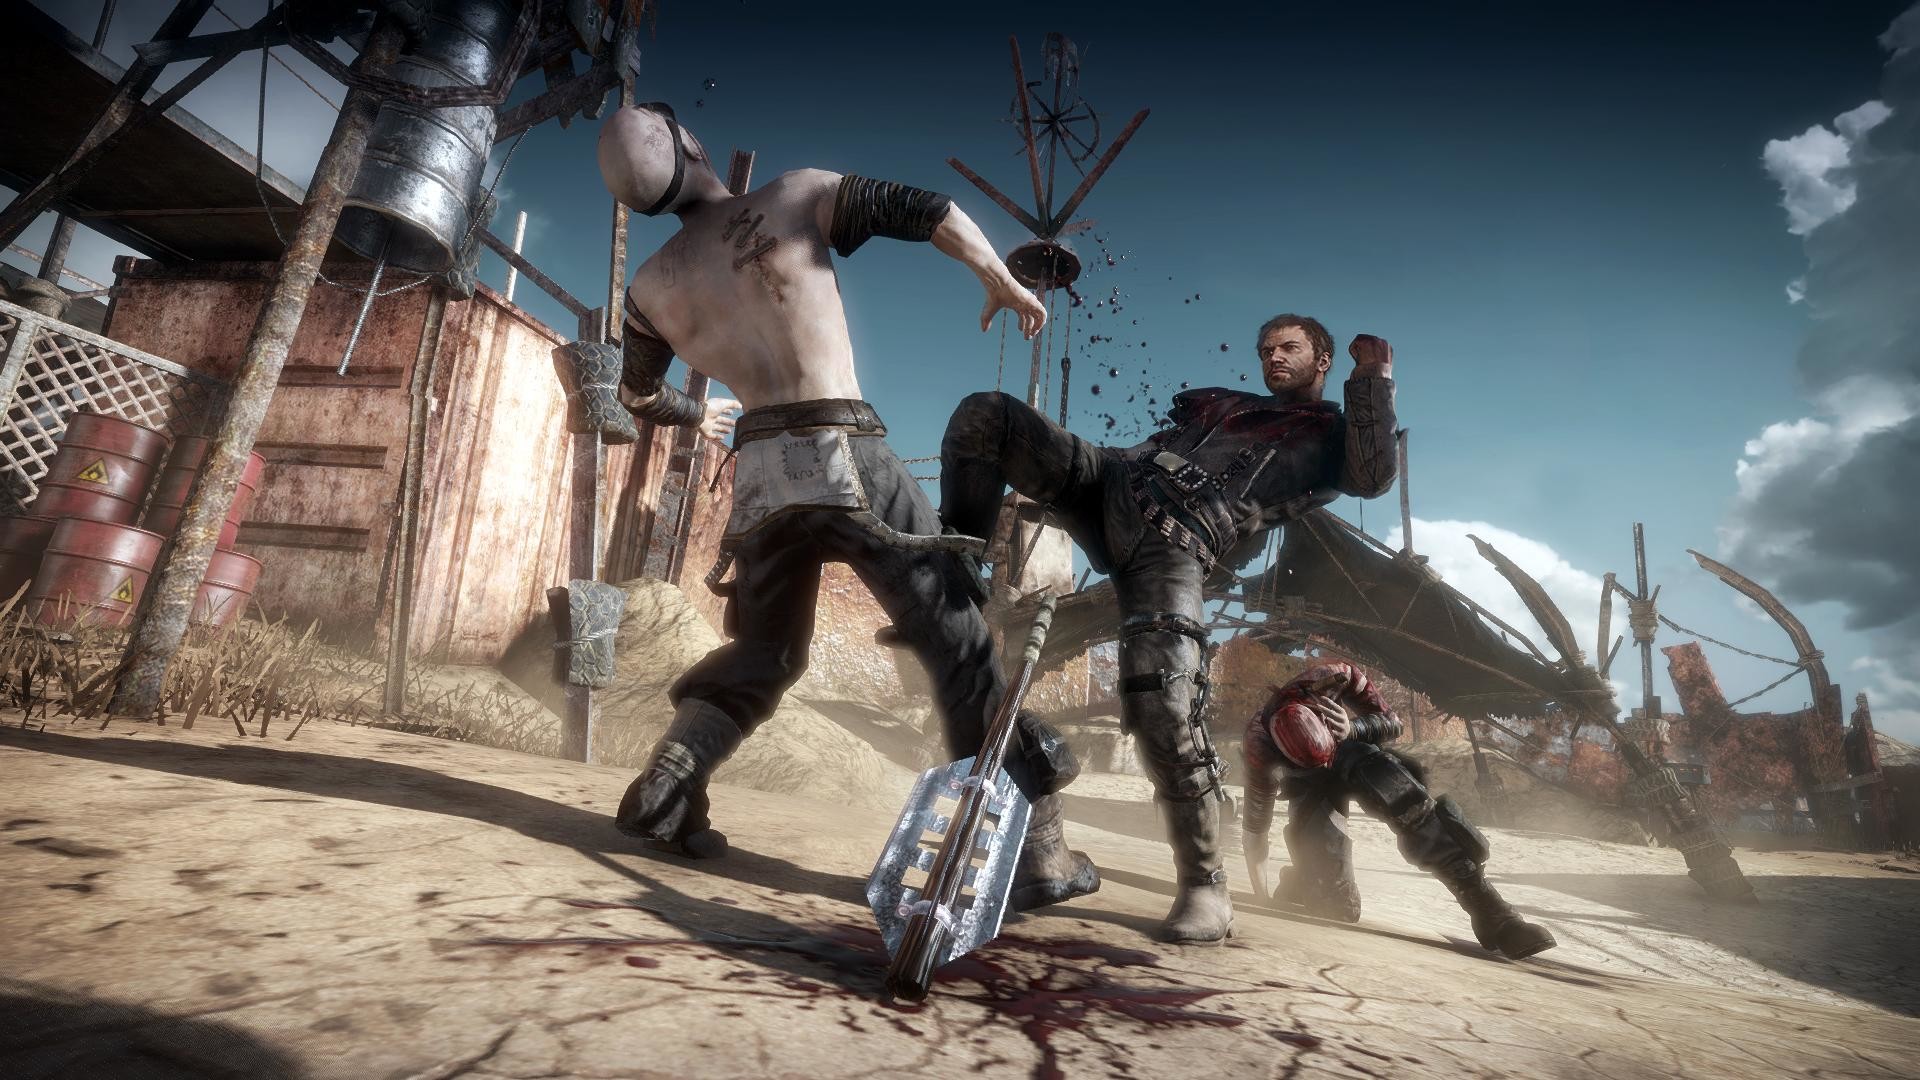 1920x1080 'Mad Max' Video Game Gets A New TV Spot